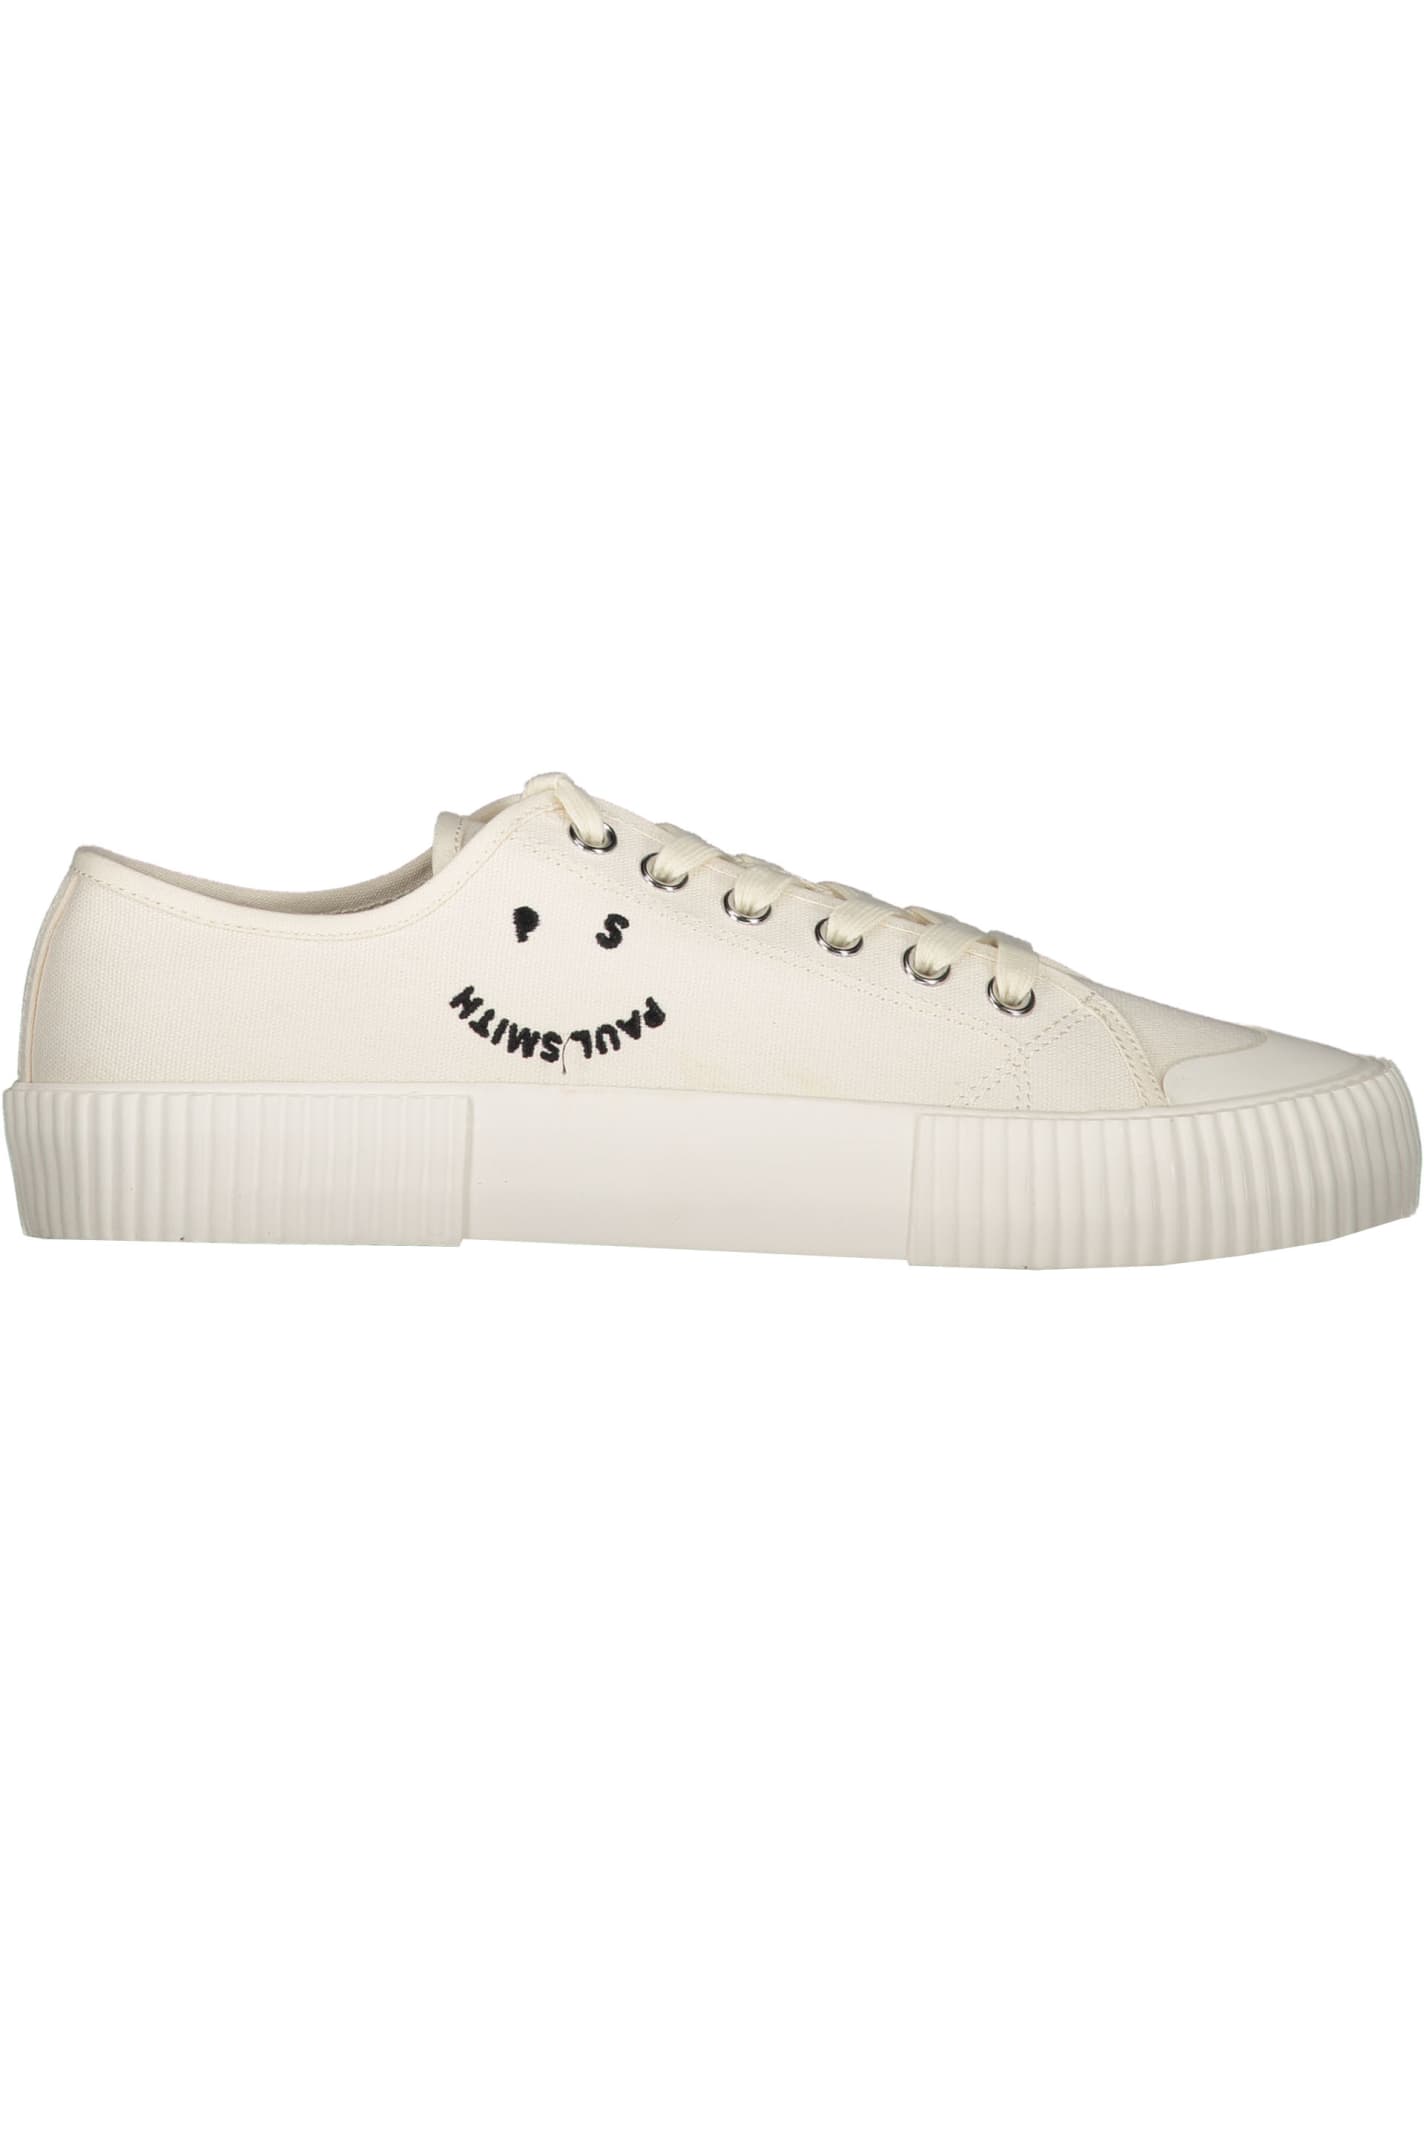 Paul Smith Canvas Low-top Sneakers In White